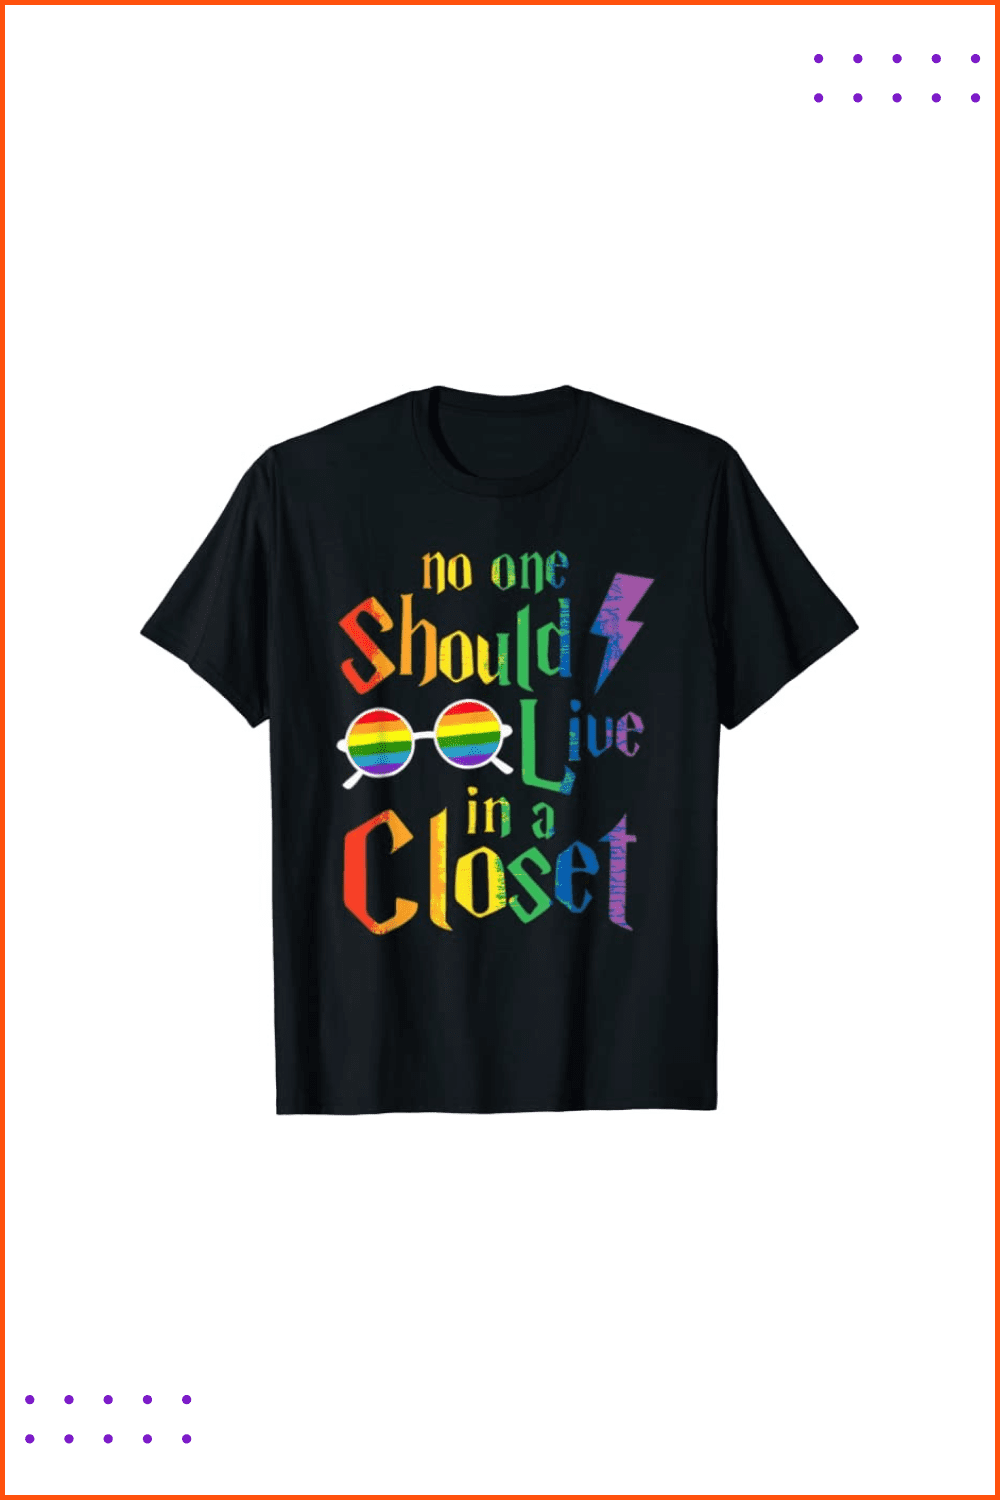 Black t-shirt with Harry Potter style text in rainbow colors.